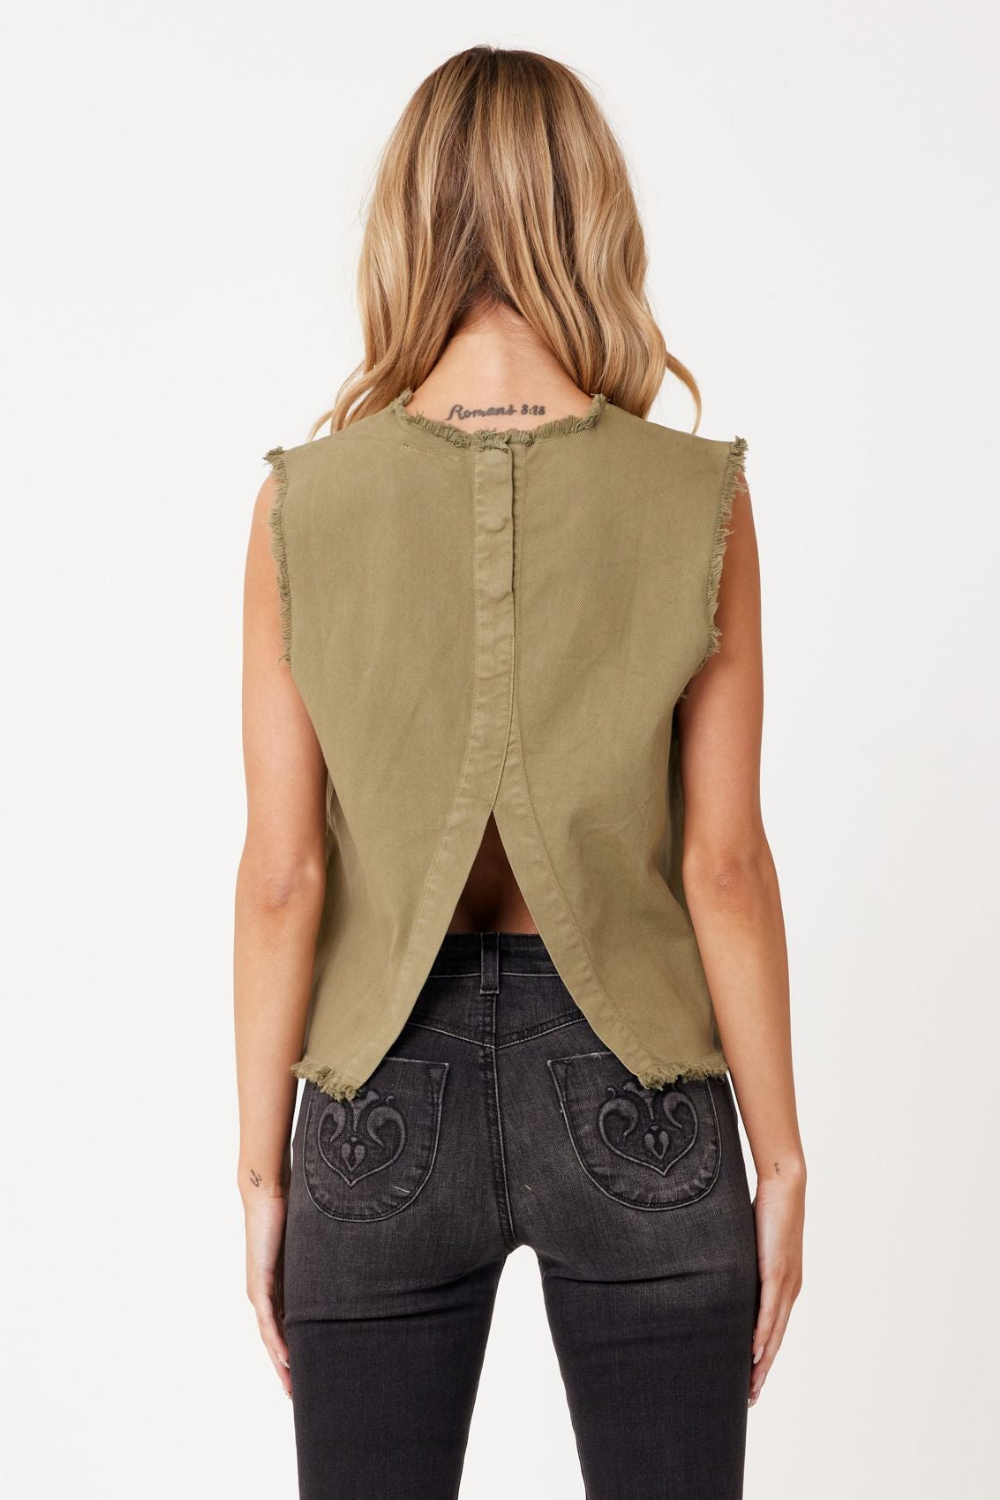 PHOEBE TOP - ARMY GREEN